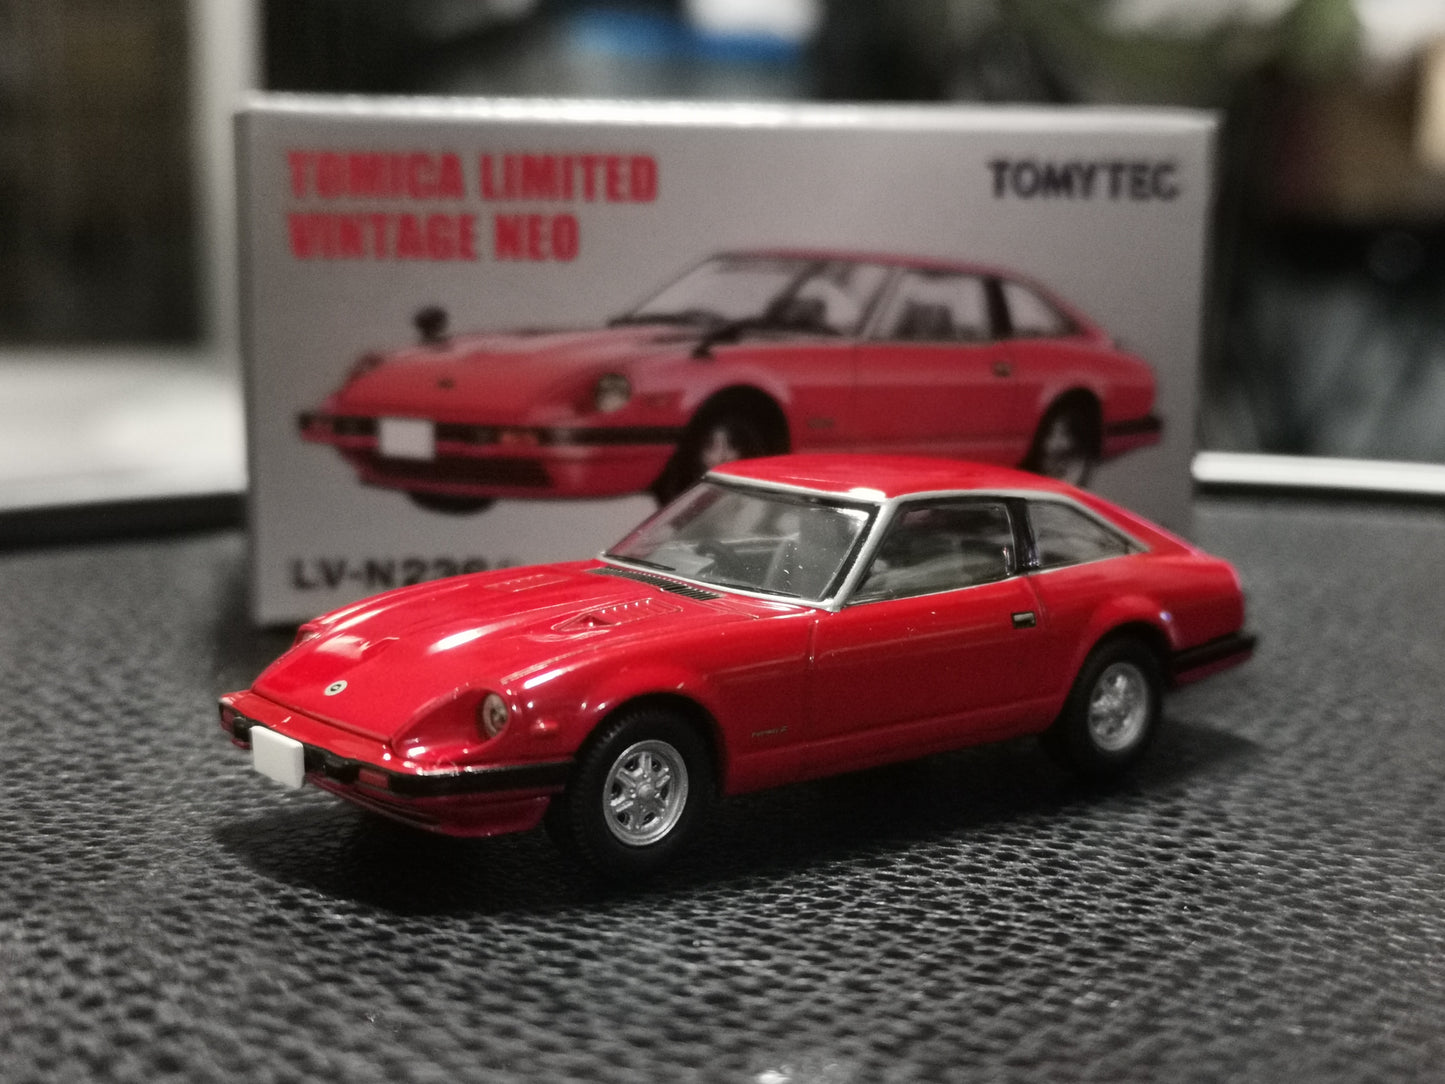 Tomica Limited Vintage Neo LV-N236b Nissan FairladyZ-T Turbo 2by2 (Red)